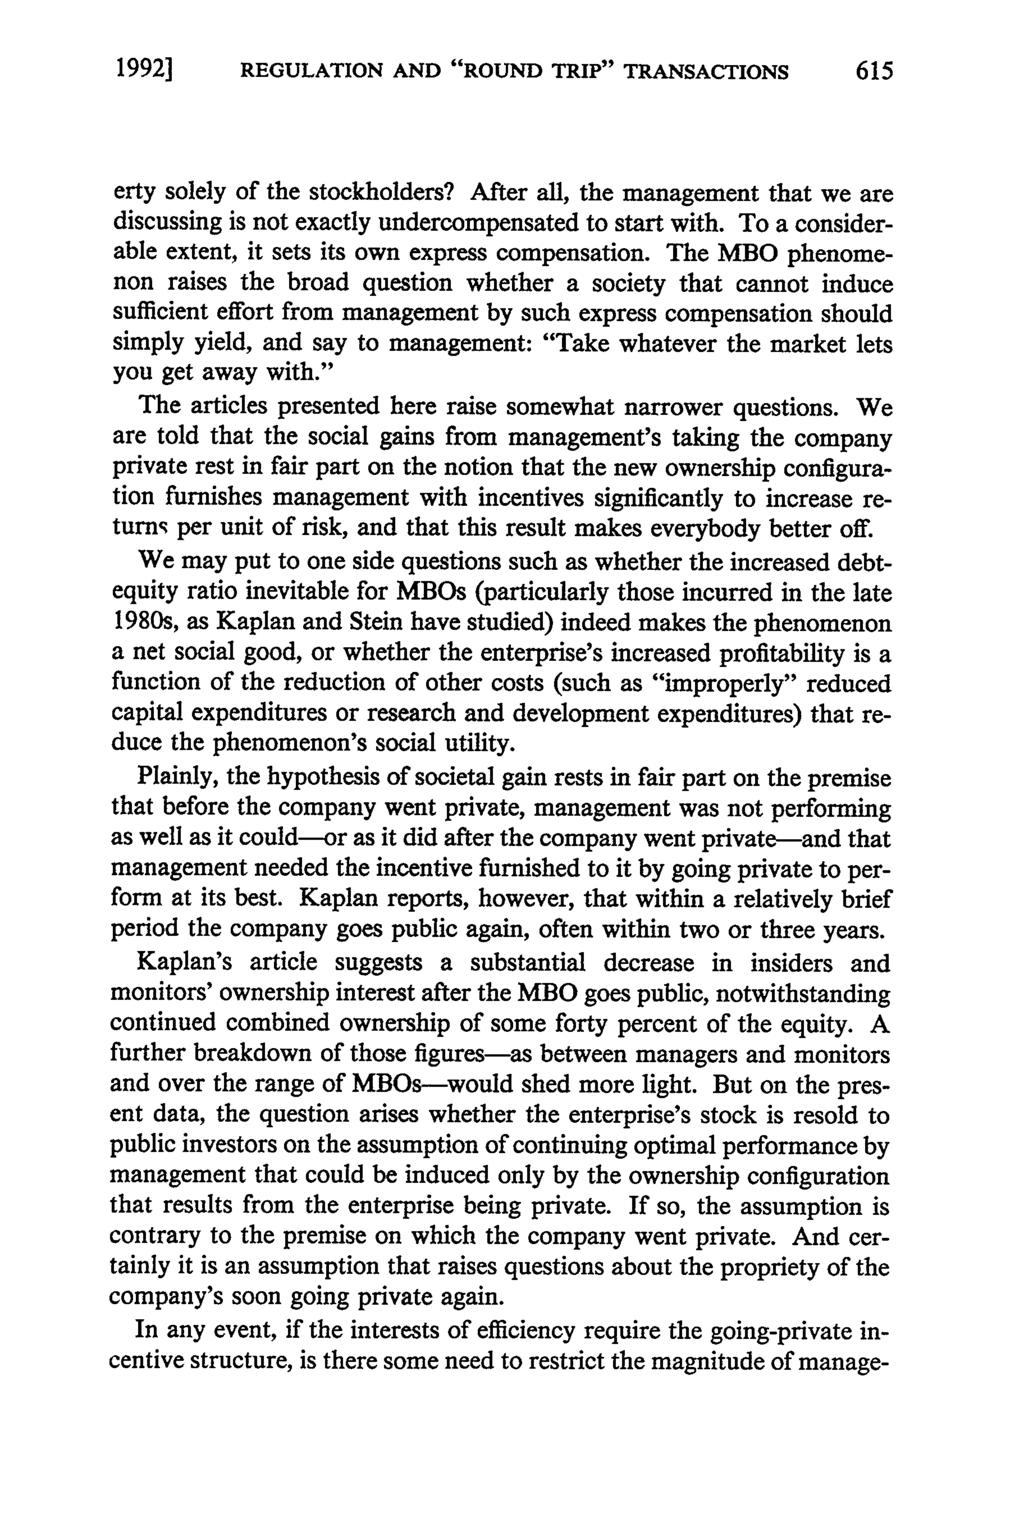 1992] REGULATION AND "ROUND TRIP" TRANSACTIONS erty solely of the stockholders? After all, the management that we are discussing is not exactly undercompensated to start with.